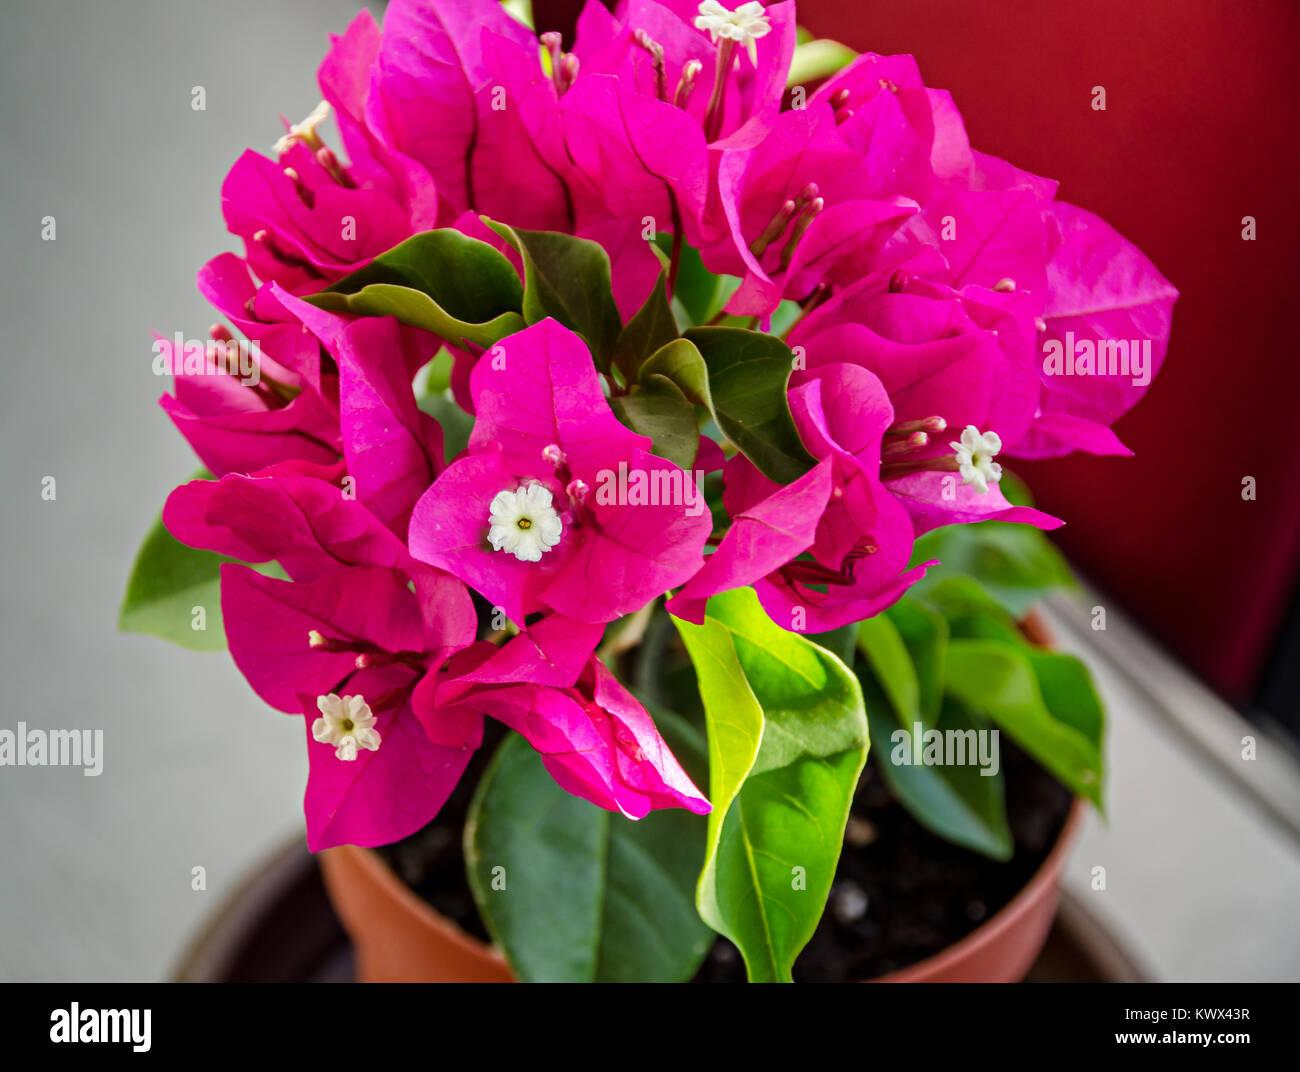 Bougainvillea pink ornamental flowers, paper flower branch with green leafs in a pot. Stock Photo